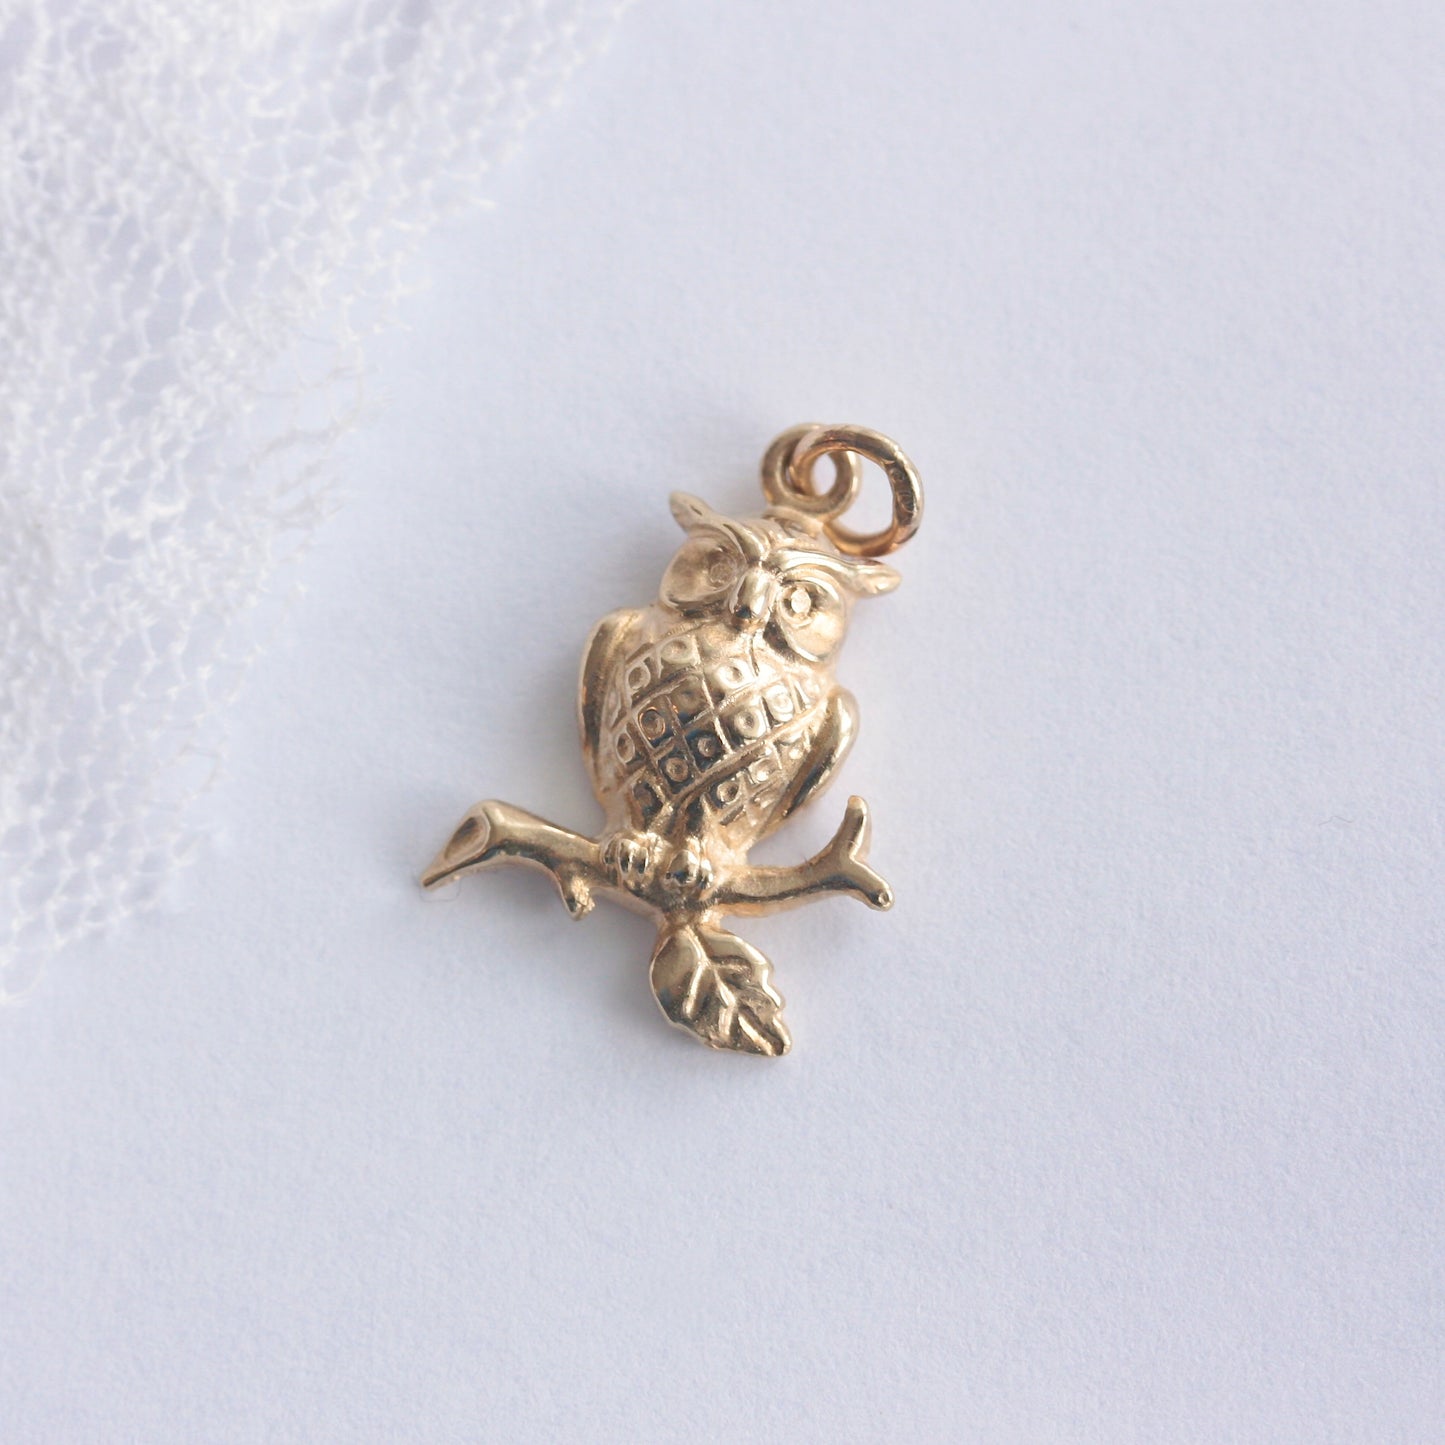 Vintage Small 9ct Gold Charm / Pendant, 1991